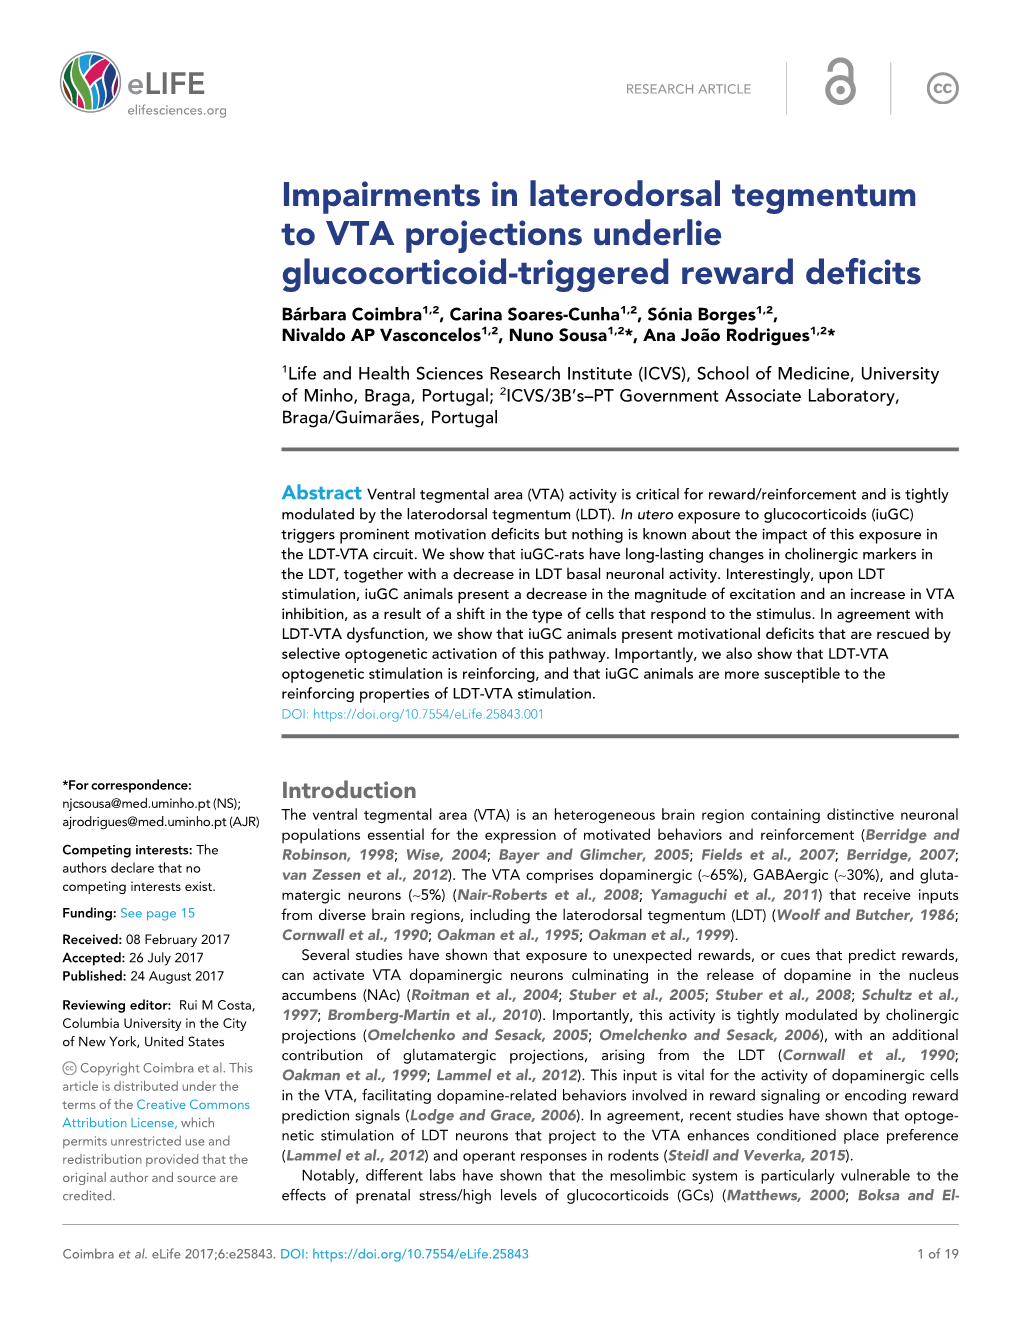 Impairments in Laterodorsal Tegmentum to VTA Projections